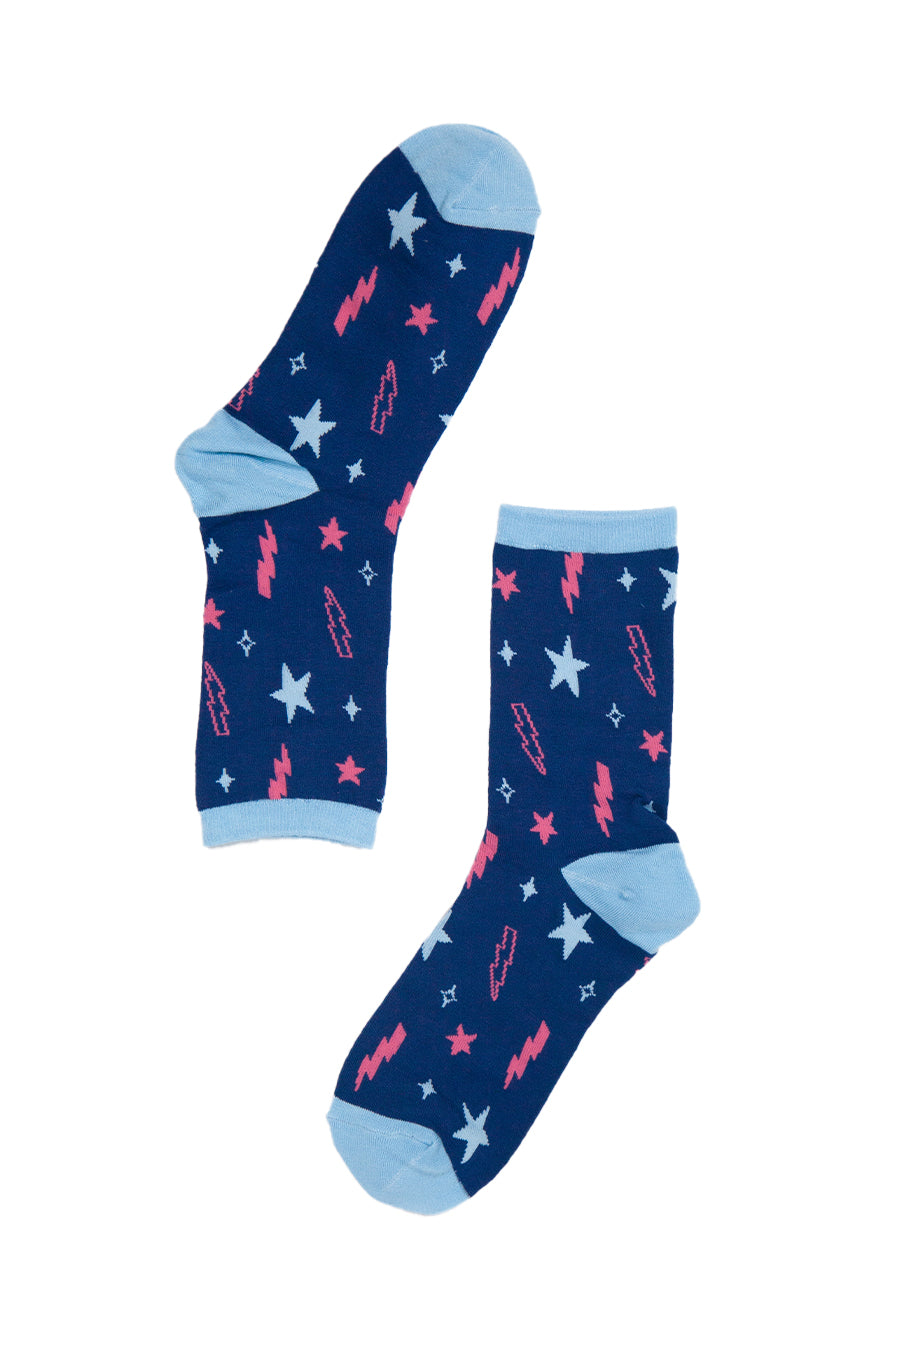 navy blue bamboo socks with an all over star and thunder bolt print